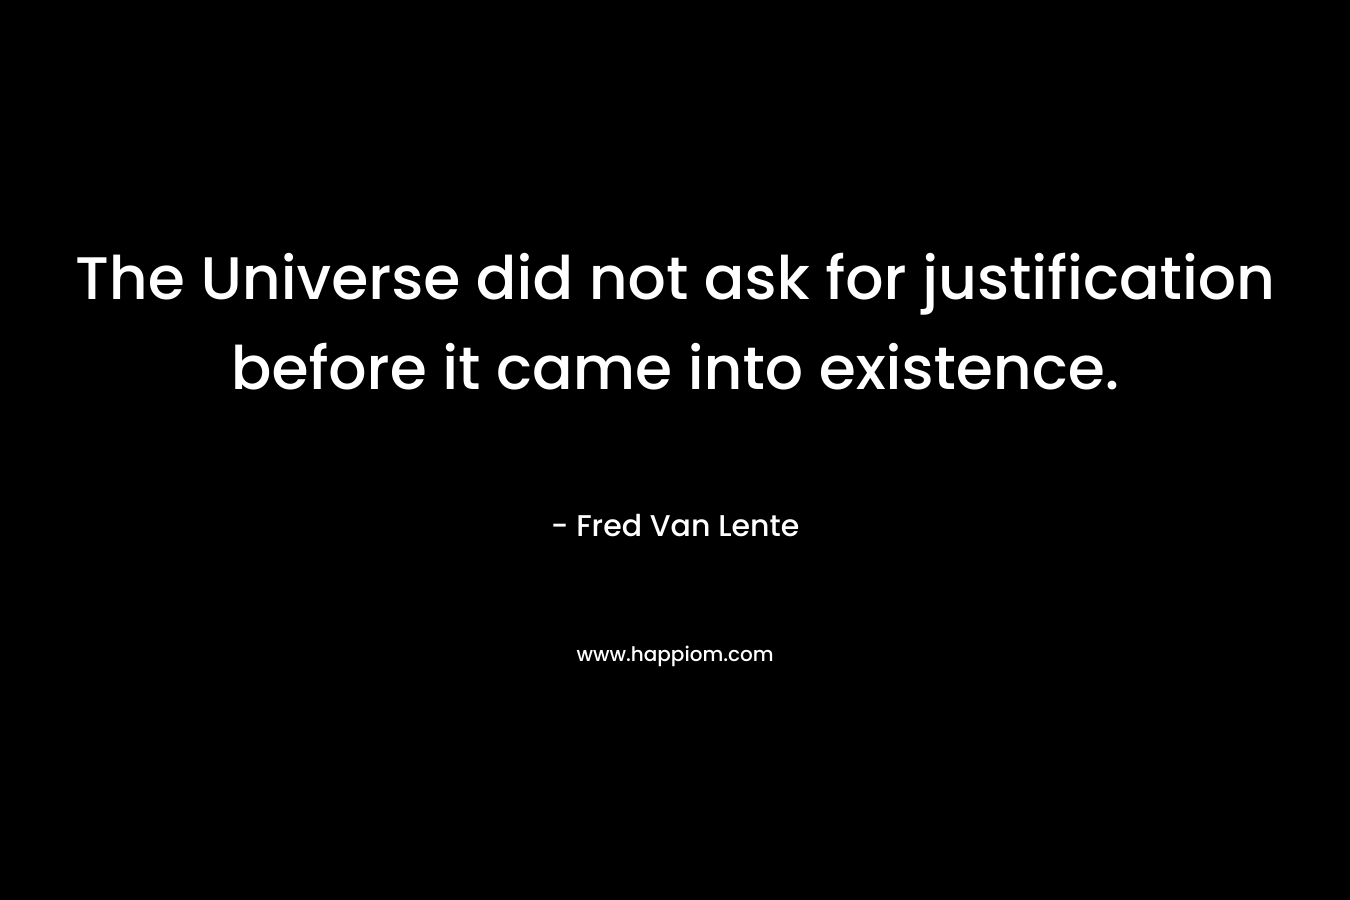 The Universe did not ask for justification before it came into existence. – Fred Van Lente